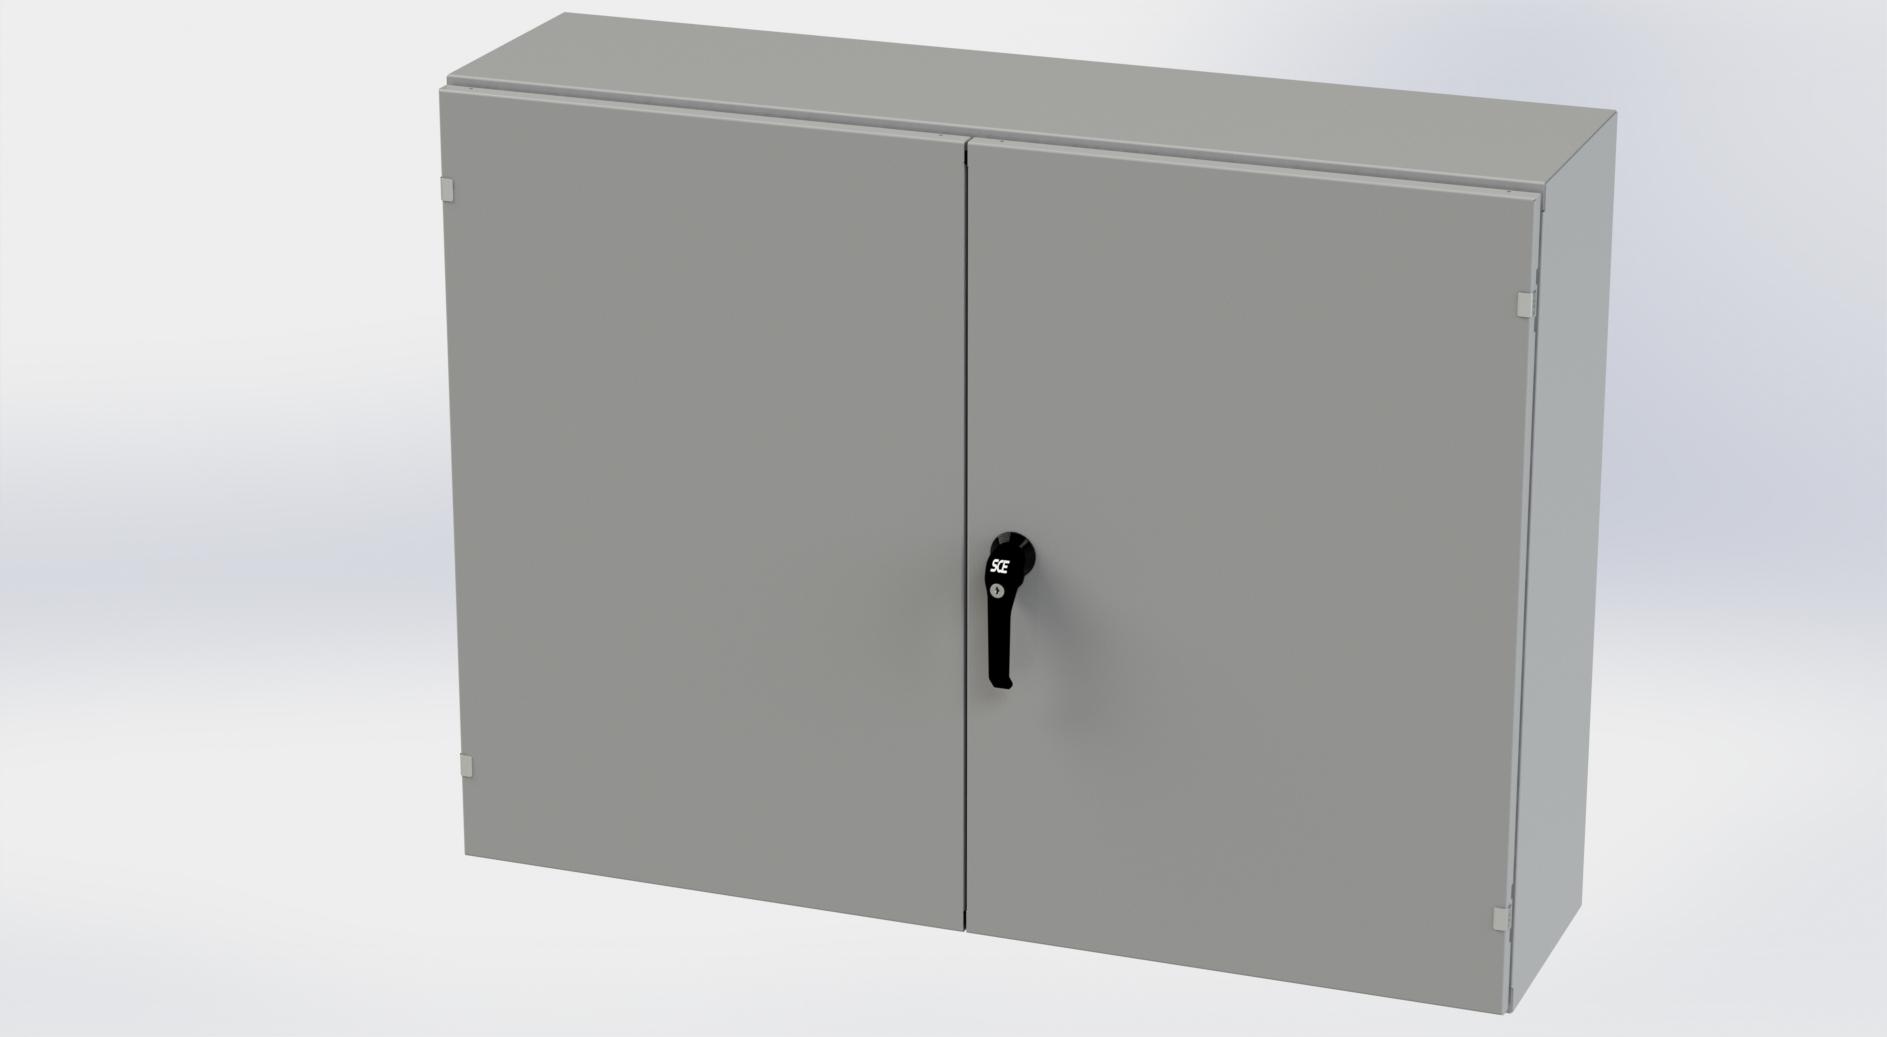 Saginaw Control SCE-364812WFLP WFLP Enclosure, Height:36.00", Width:48.00", Depth:12.00", ANSI-61 gray powder coating inside and out.